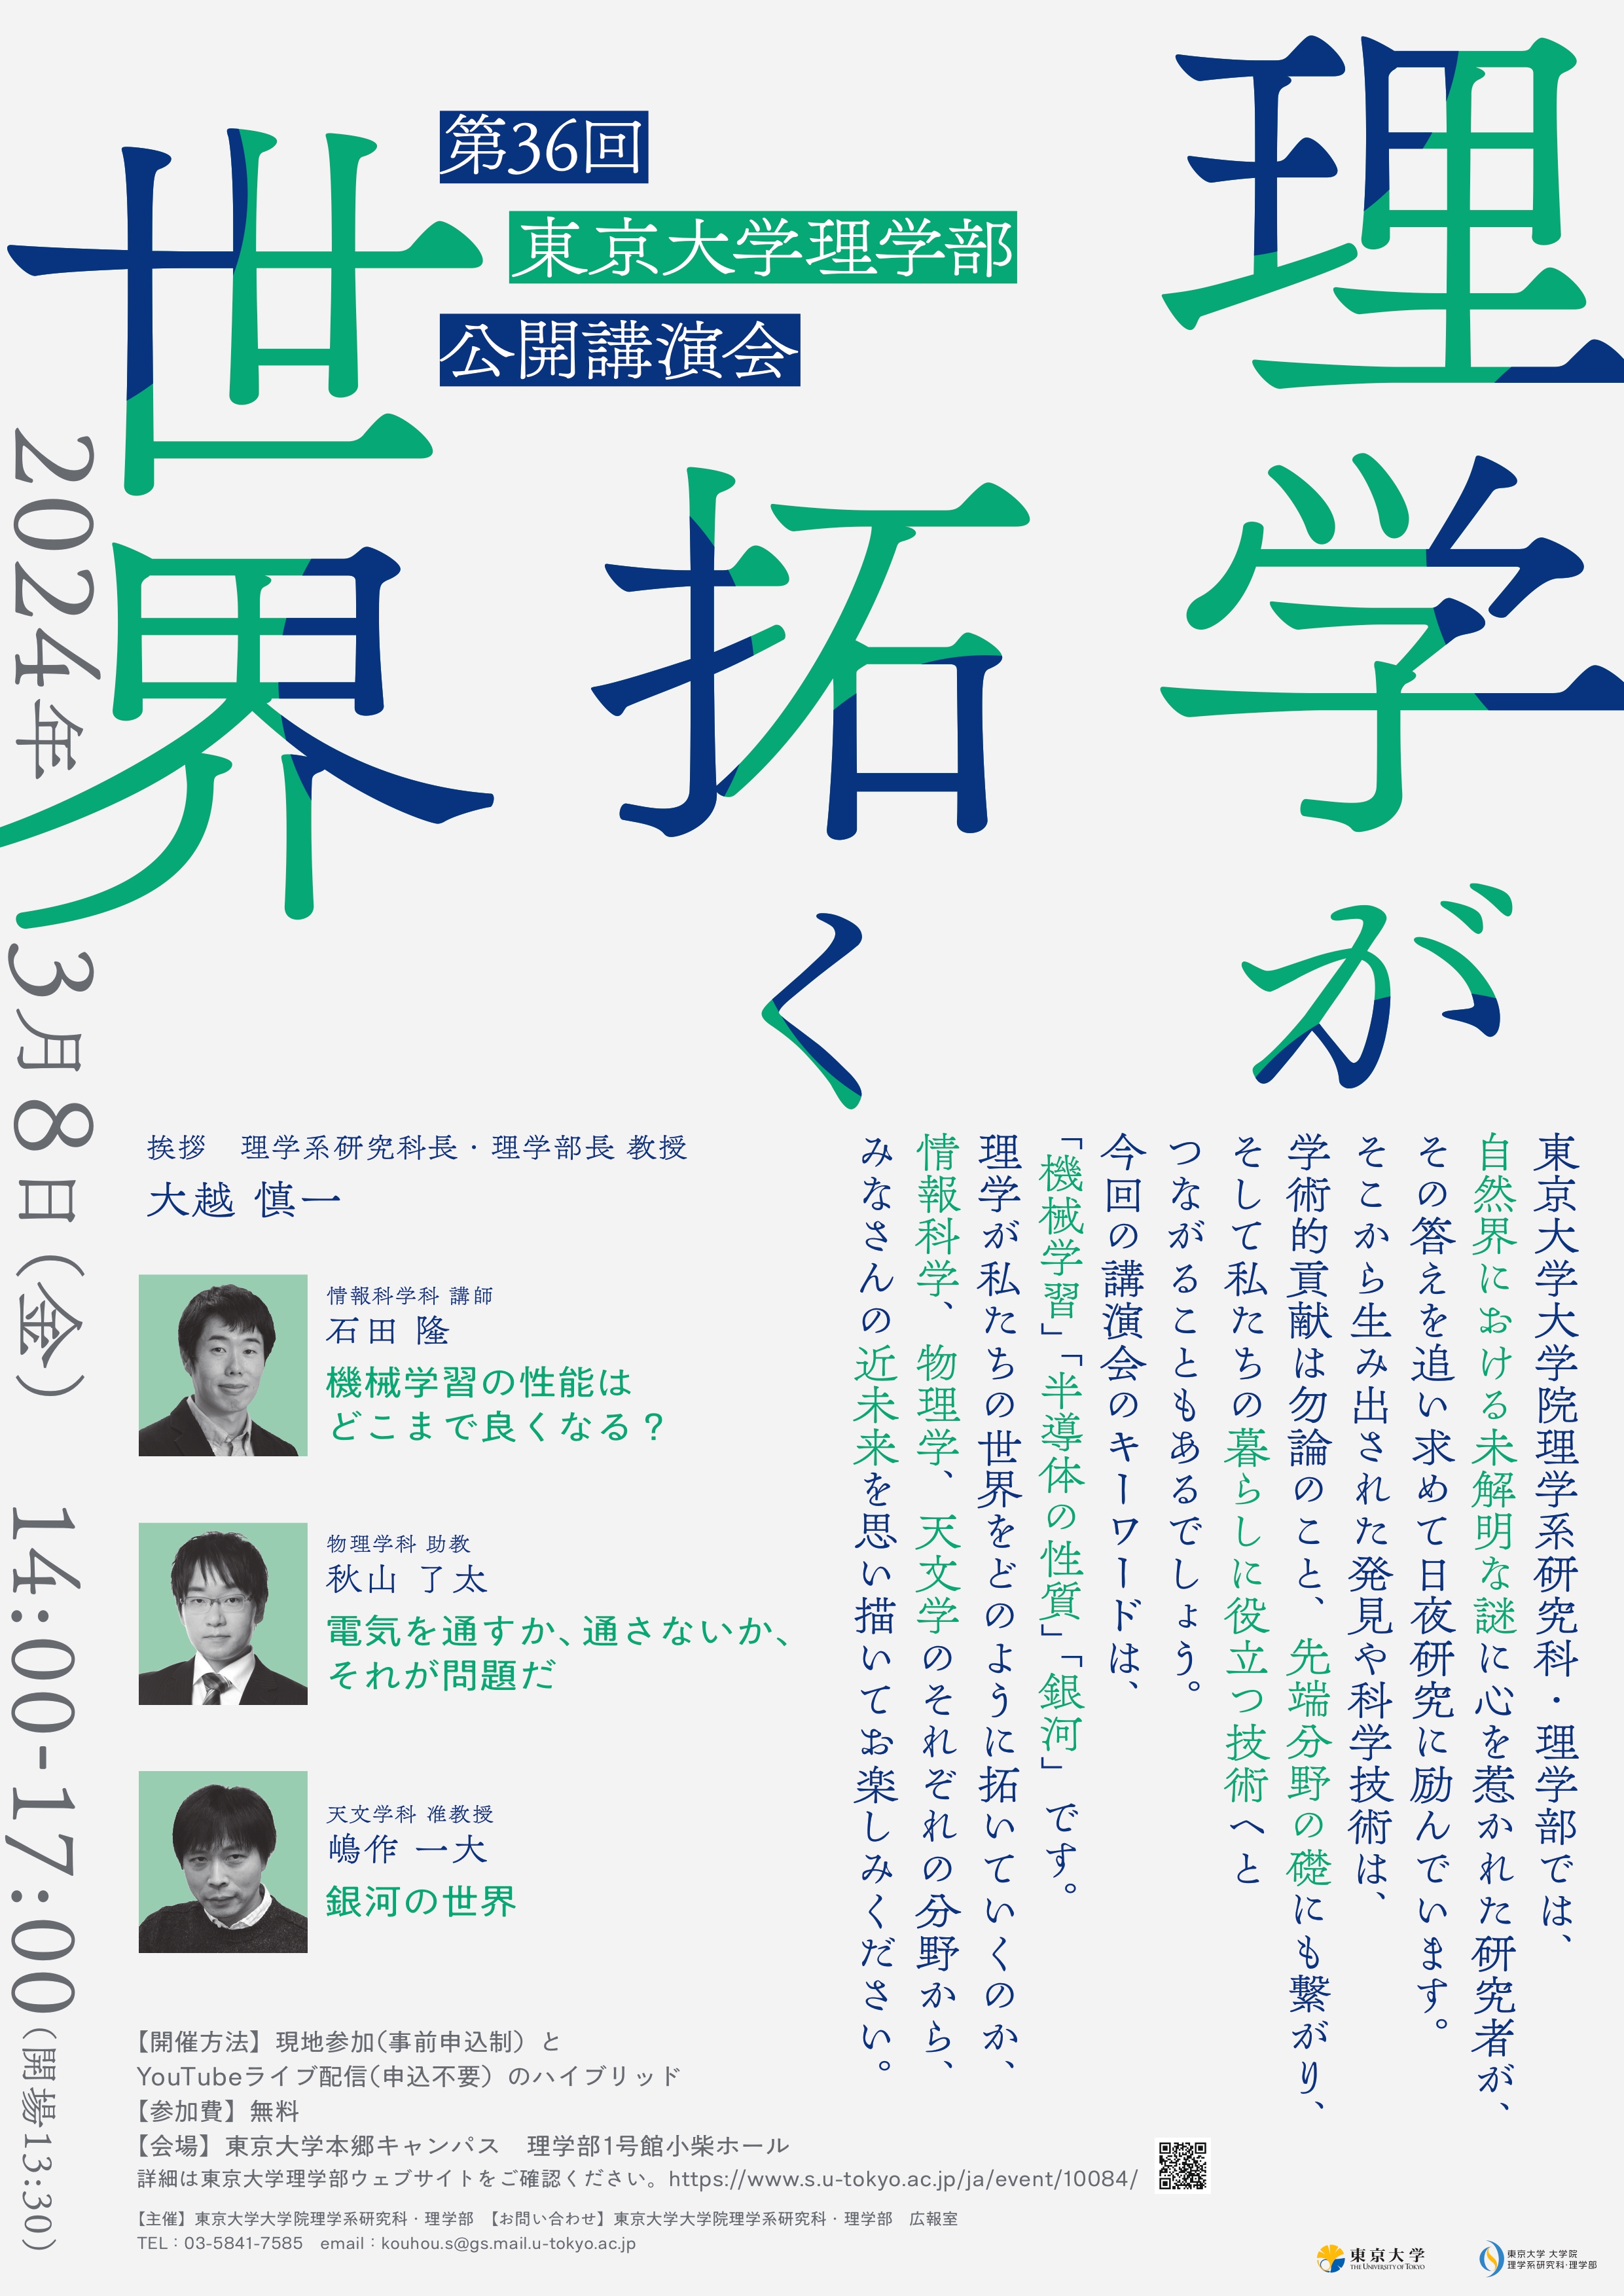 The 36th Public Lecture, School of Science, The University of Tokyo